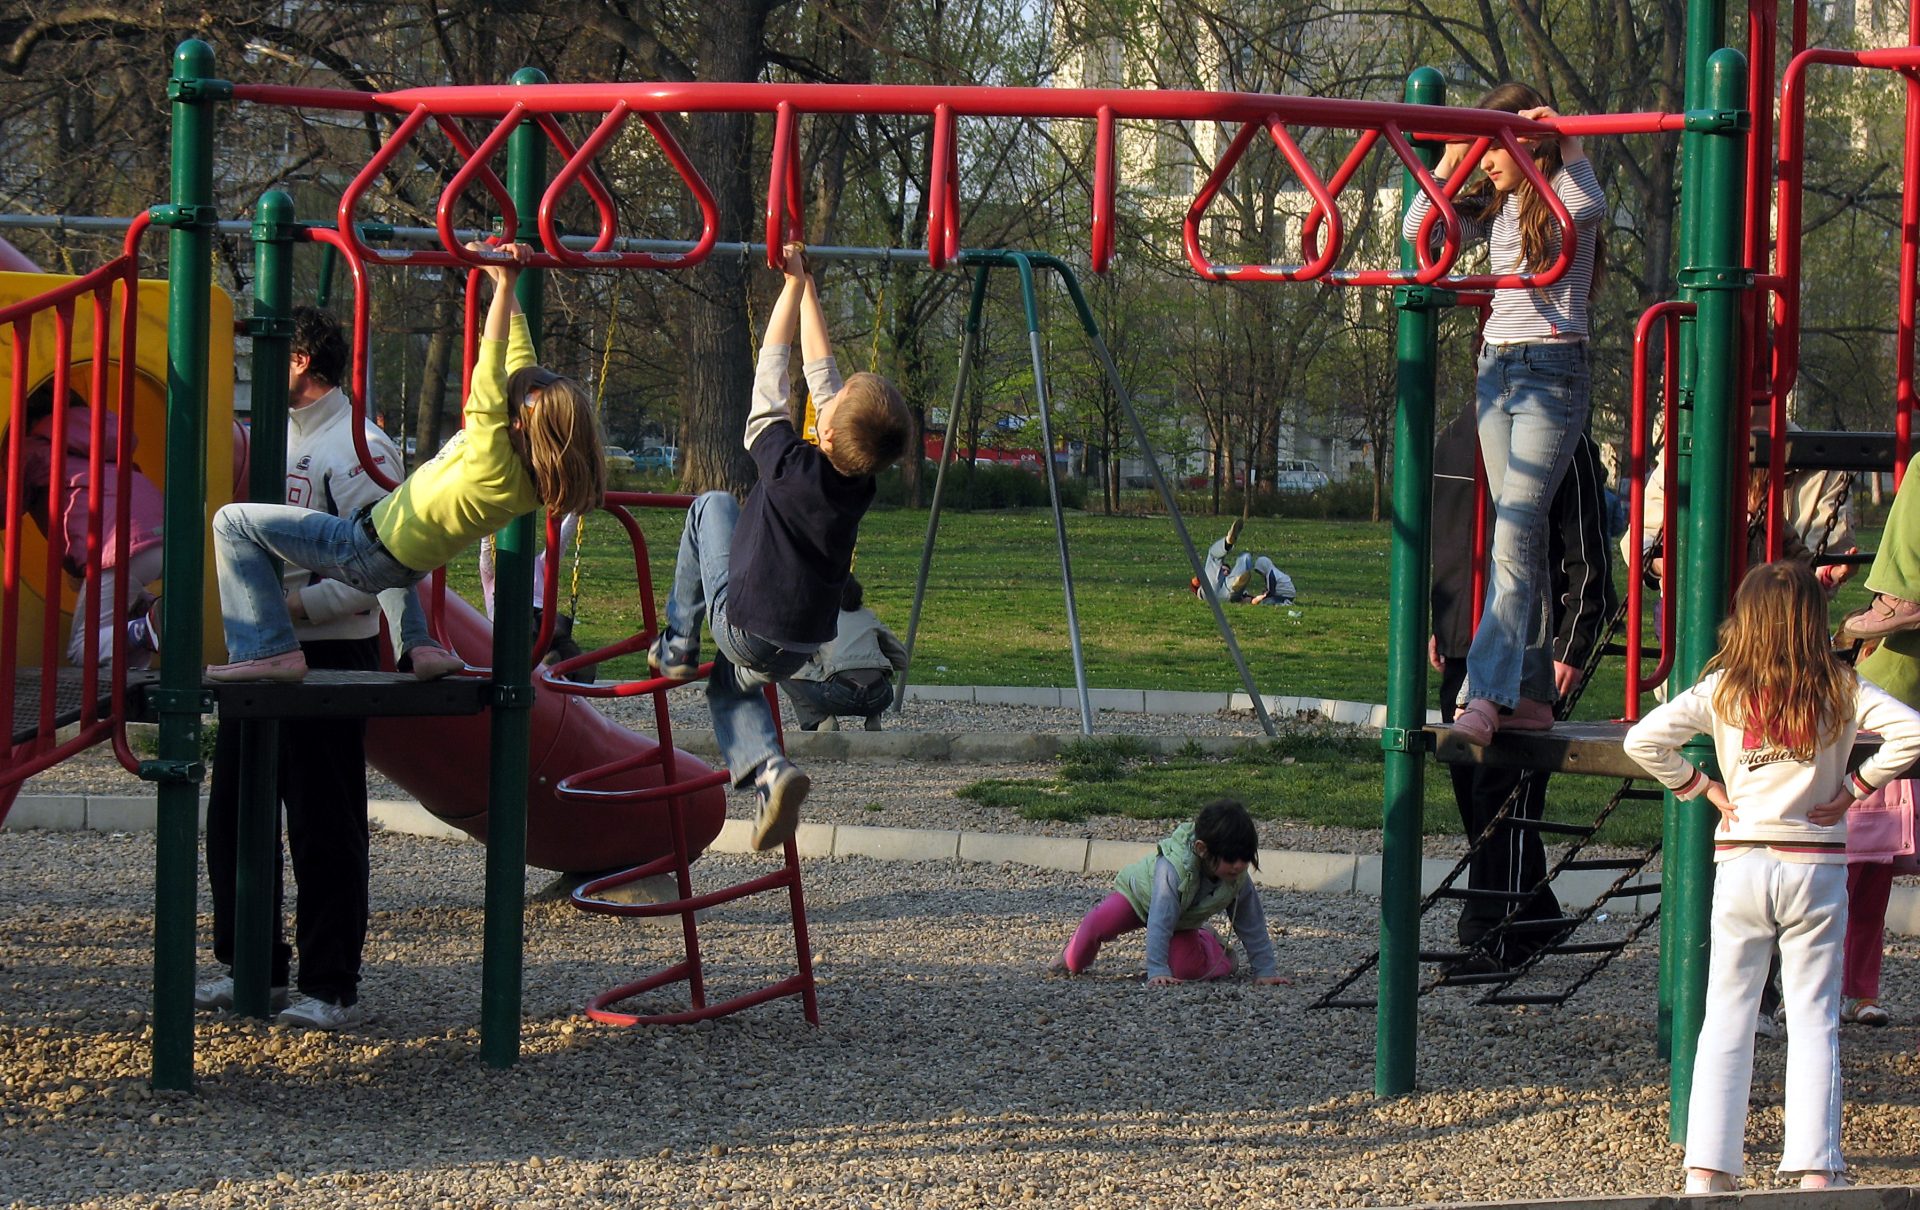 Commentary: Why does recess matter?